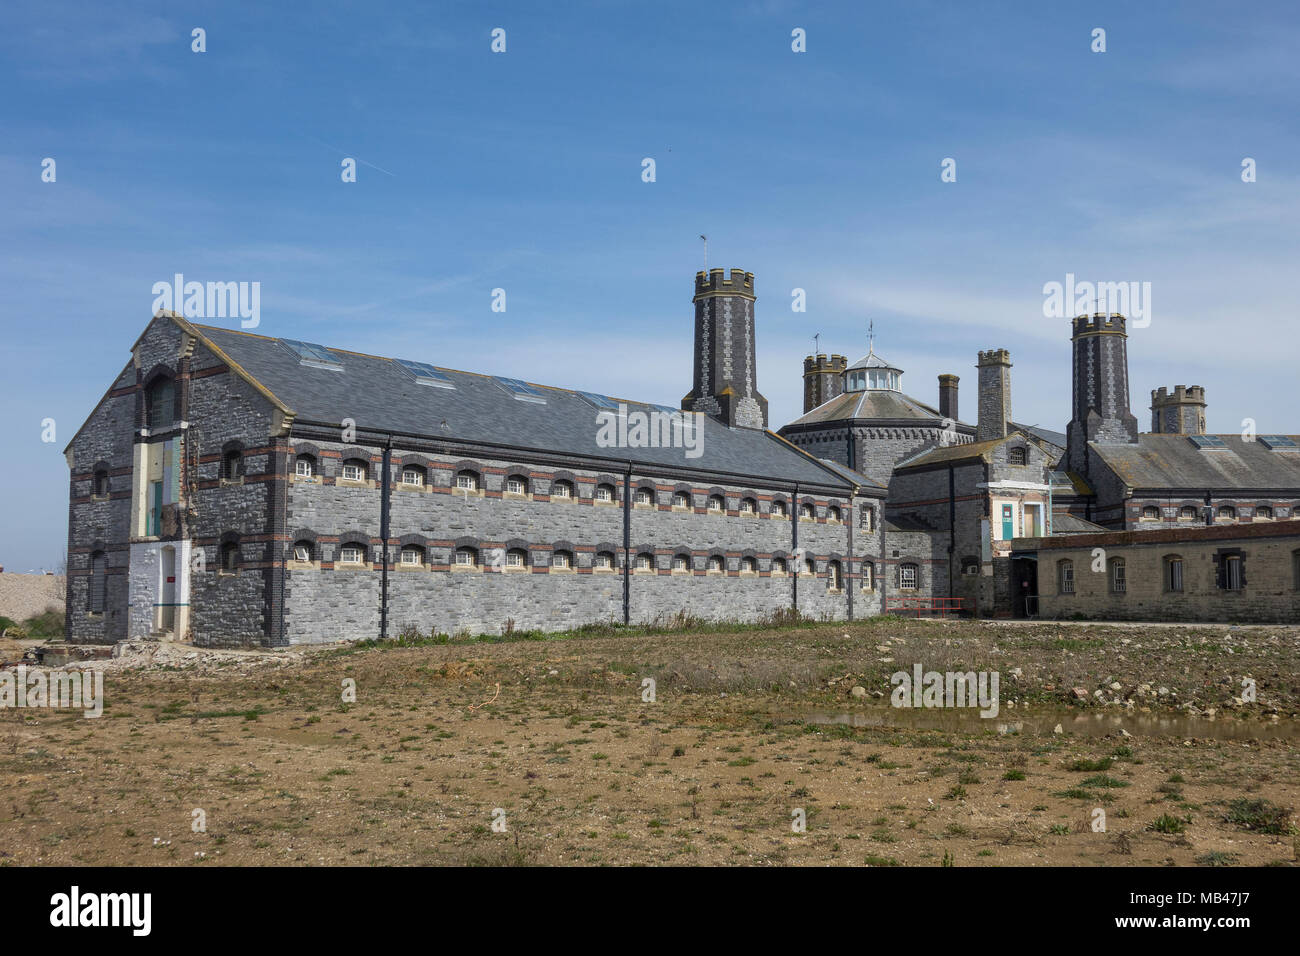 England, Hampshire, Portsmouth, Pompey Prison, buildings seen from within the walls Stock Photo